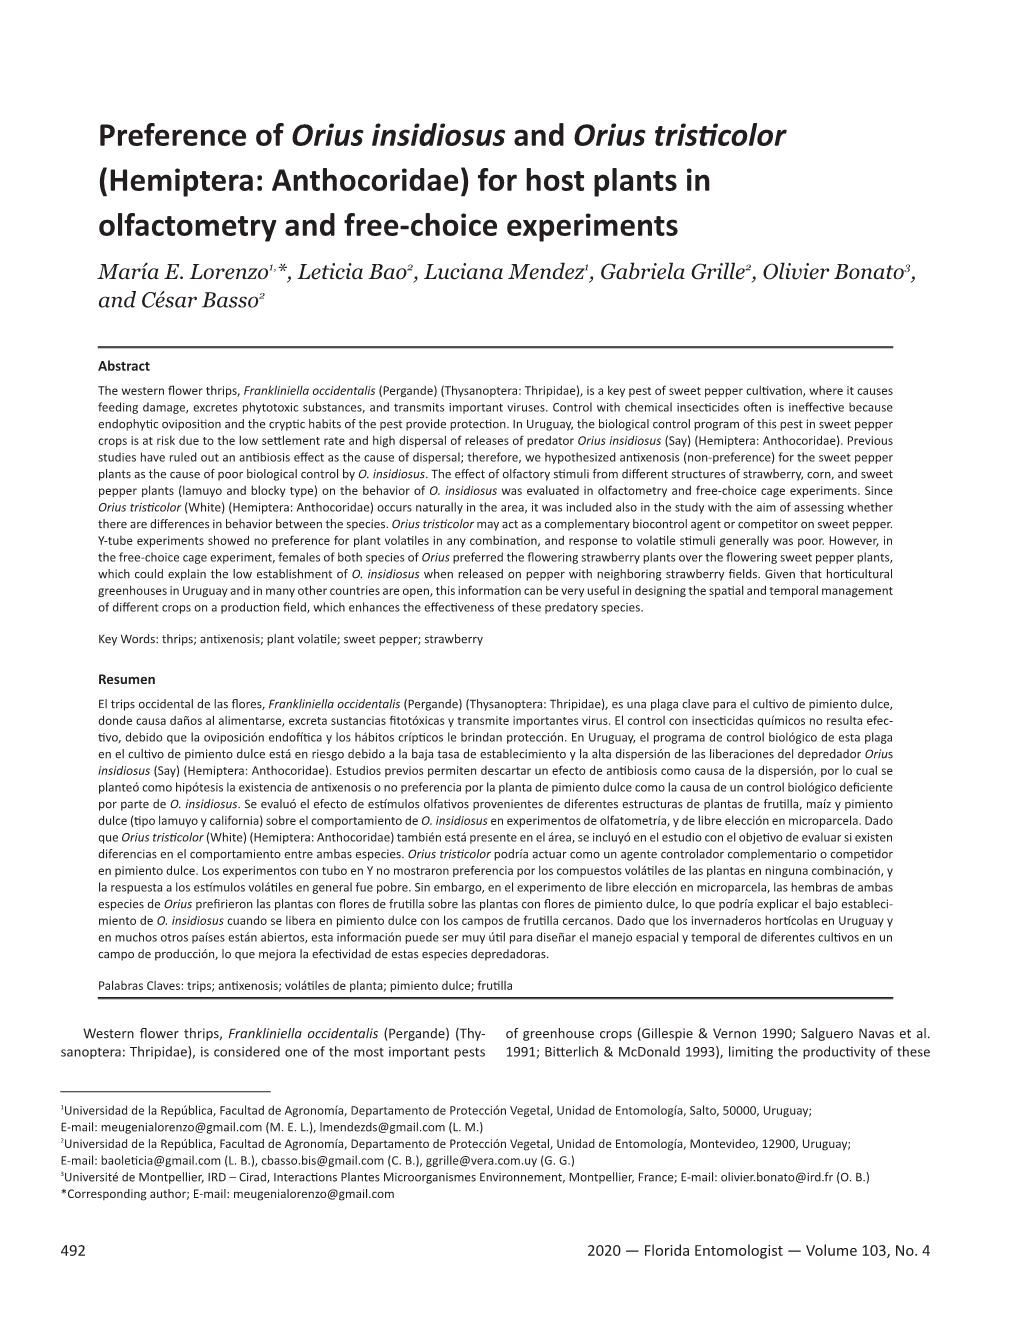 Preference of Orius Insidiosus and Orius Tristicolor (Hemiptera: Anthocoridae) for Host Plants in Olfactometry and Free-Choice Experiments